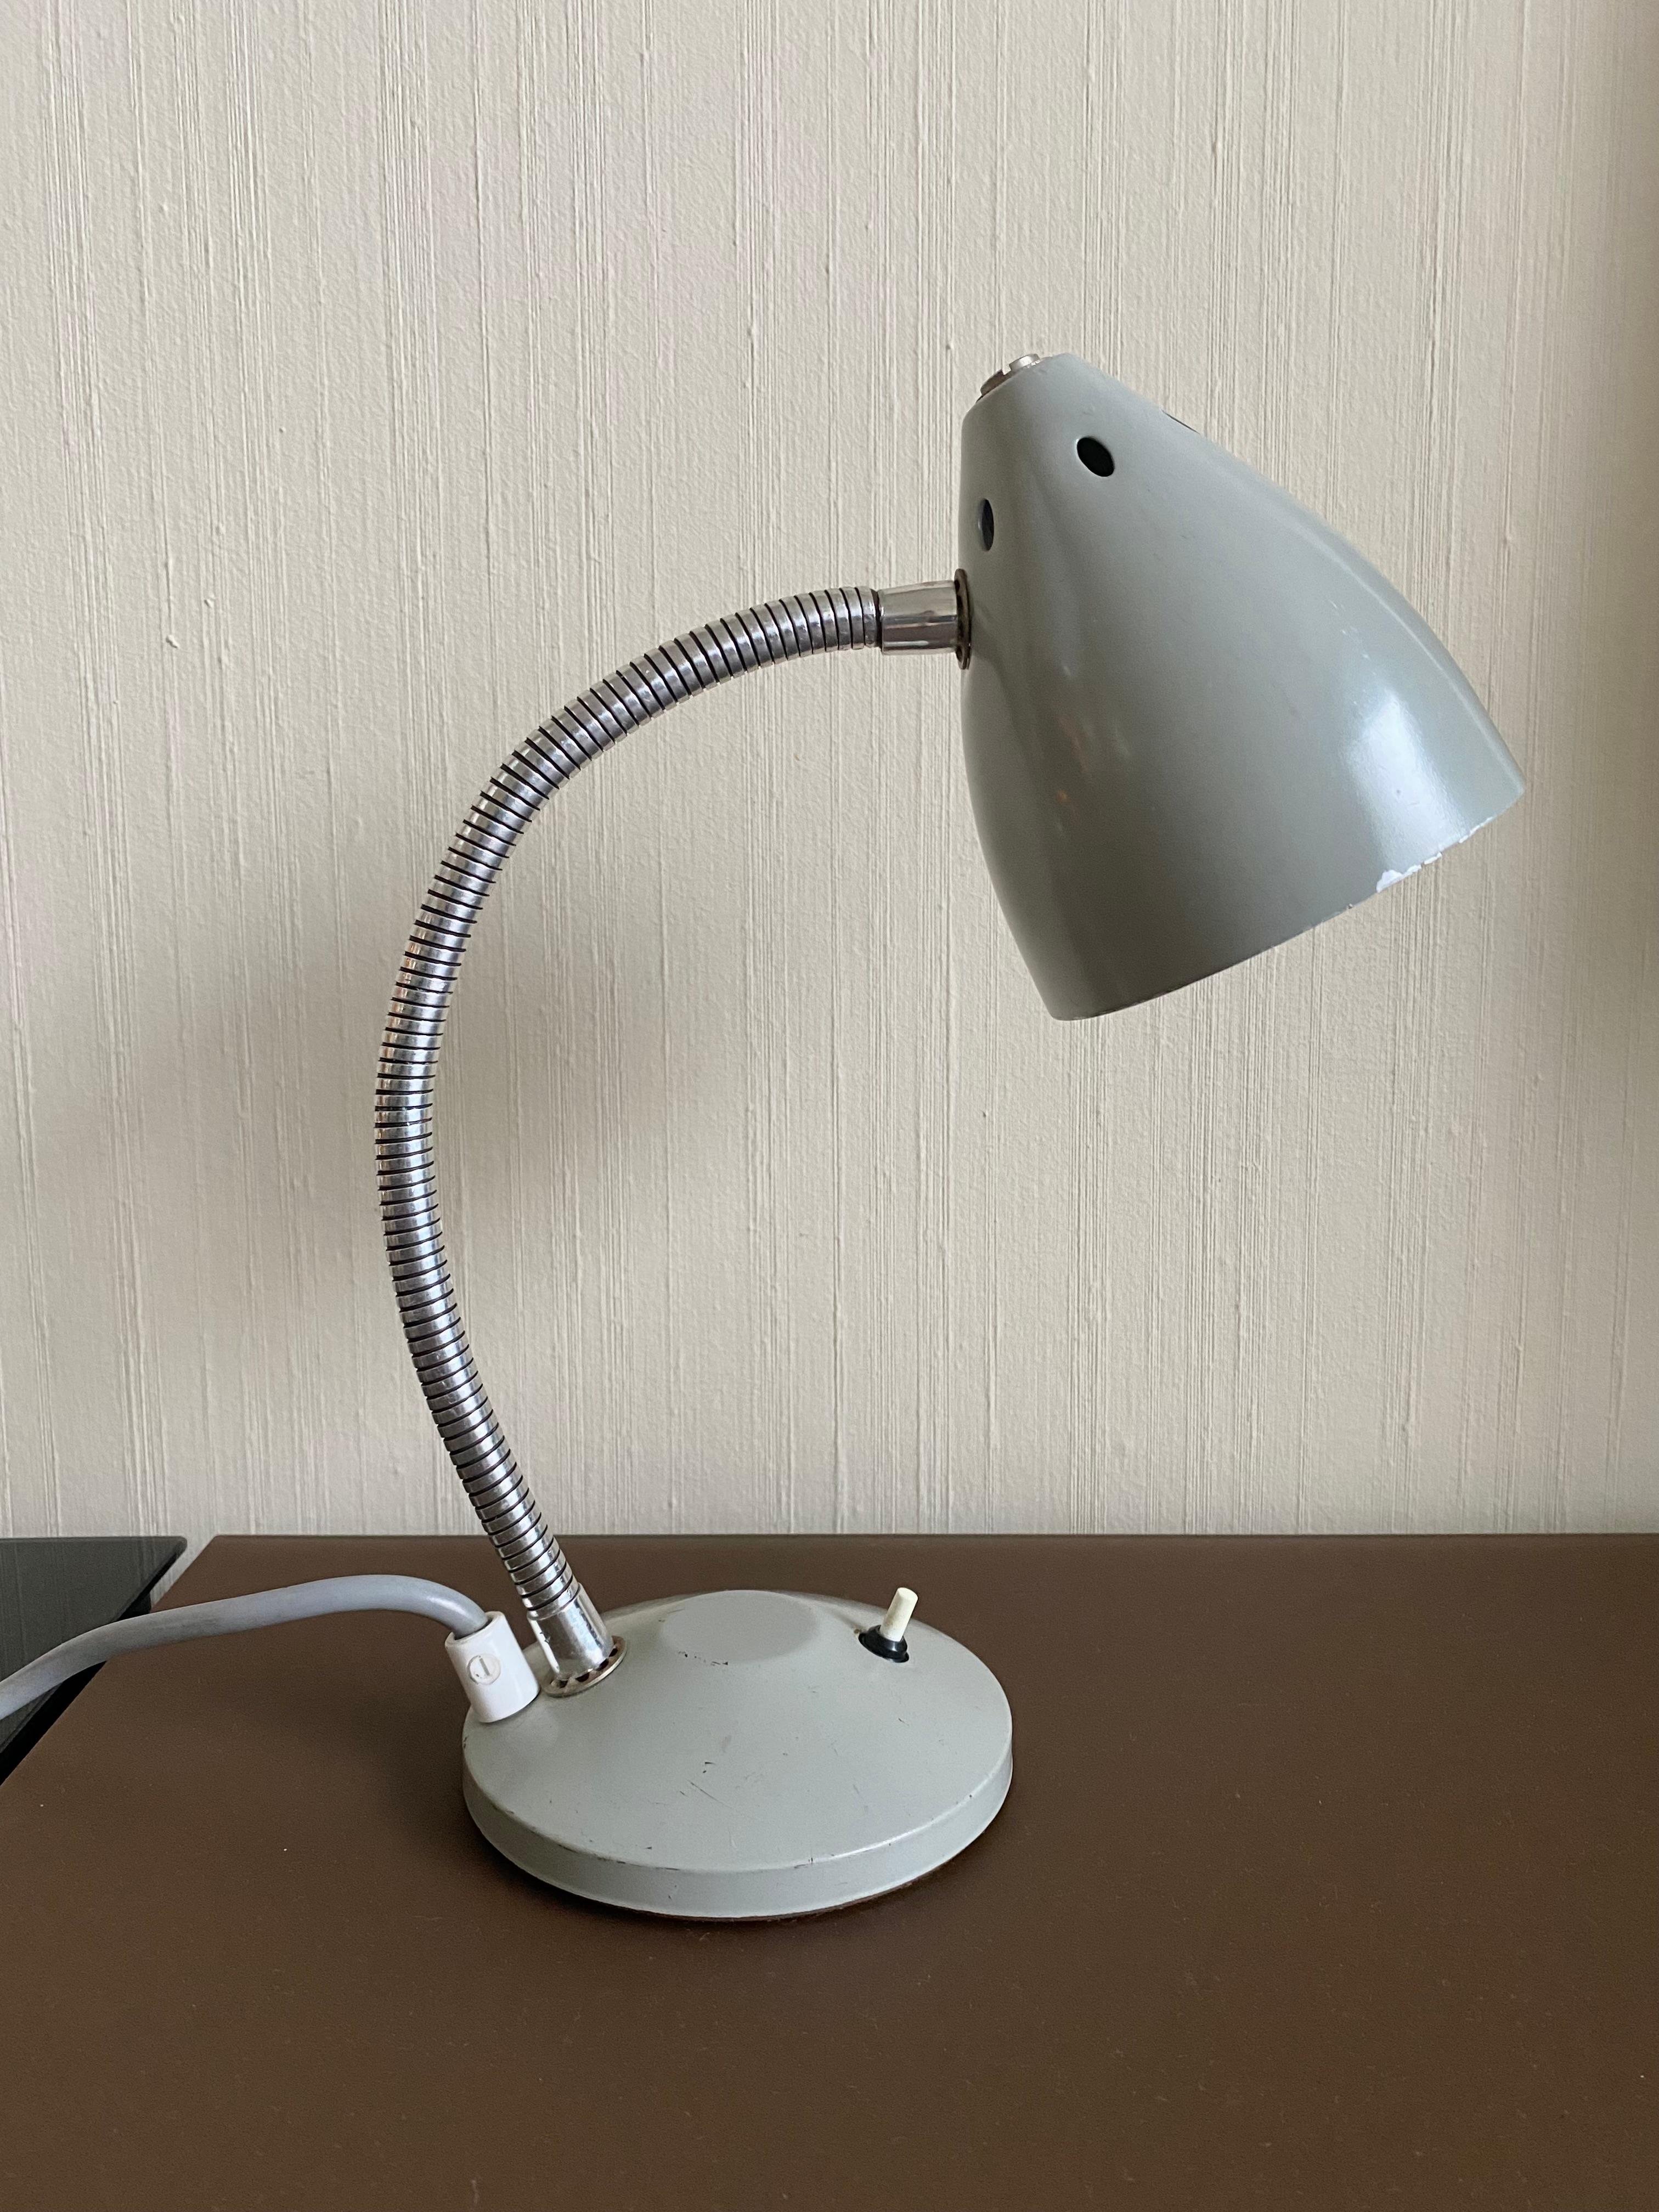 Small desk lamp or reading lamp, designed by Herman Theodoor Busquet for Hala Zeist ca. the 1960s. This cute little lamp was called ‘Ukkie’, a term which is also used in Holland for children. This piece remains in wonderful condition with minimal